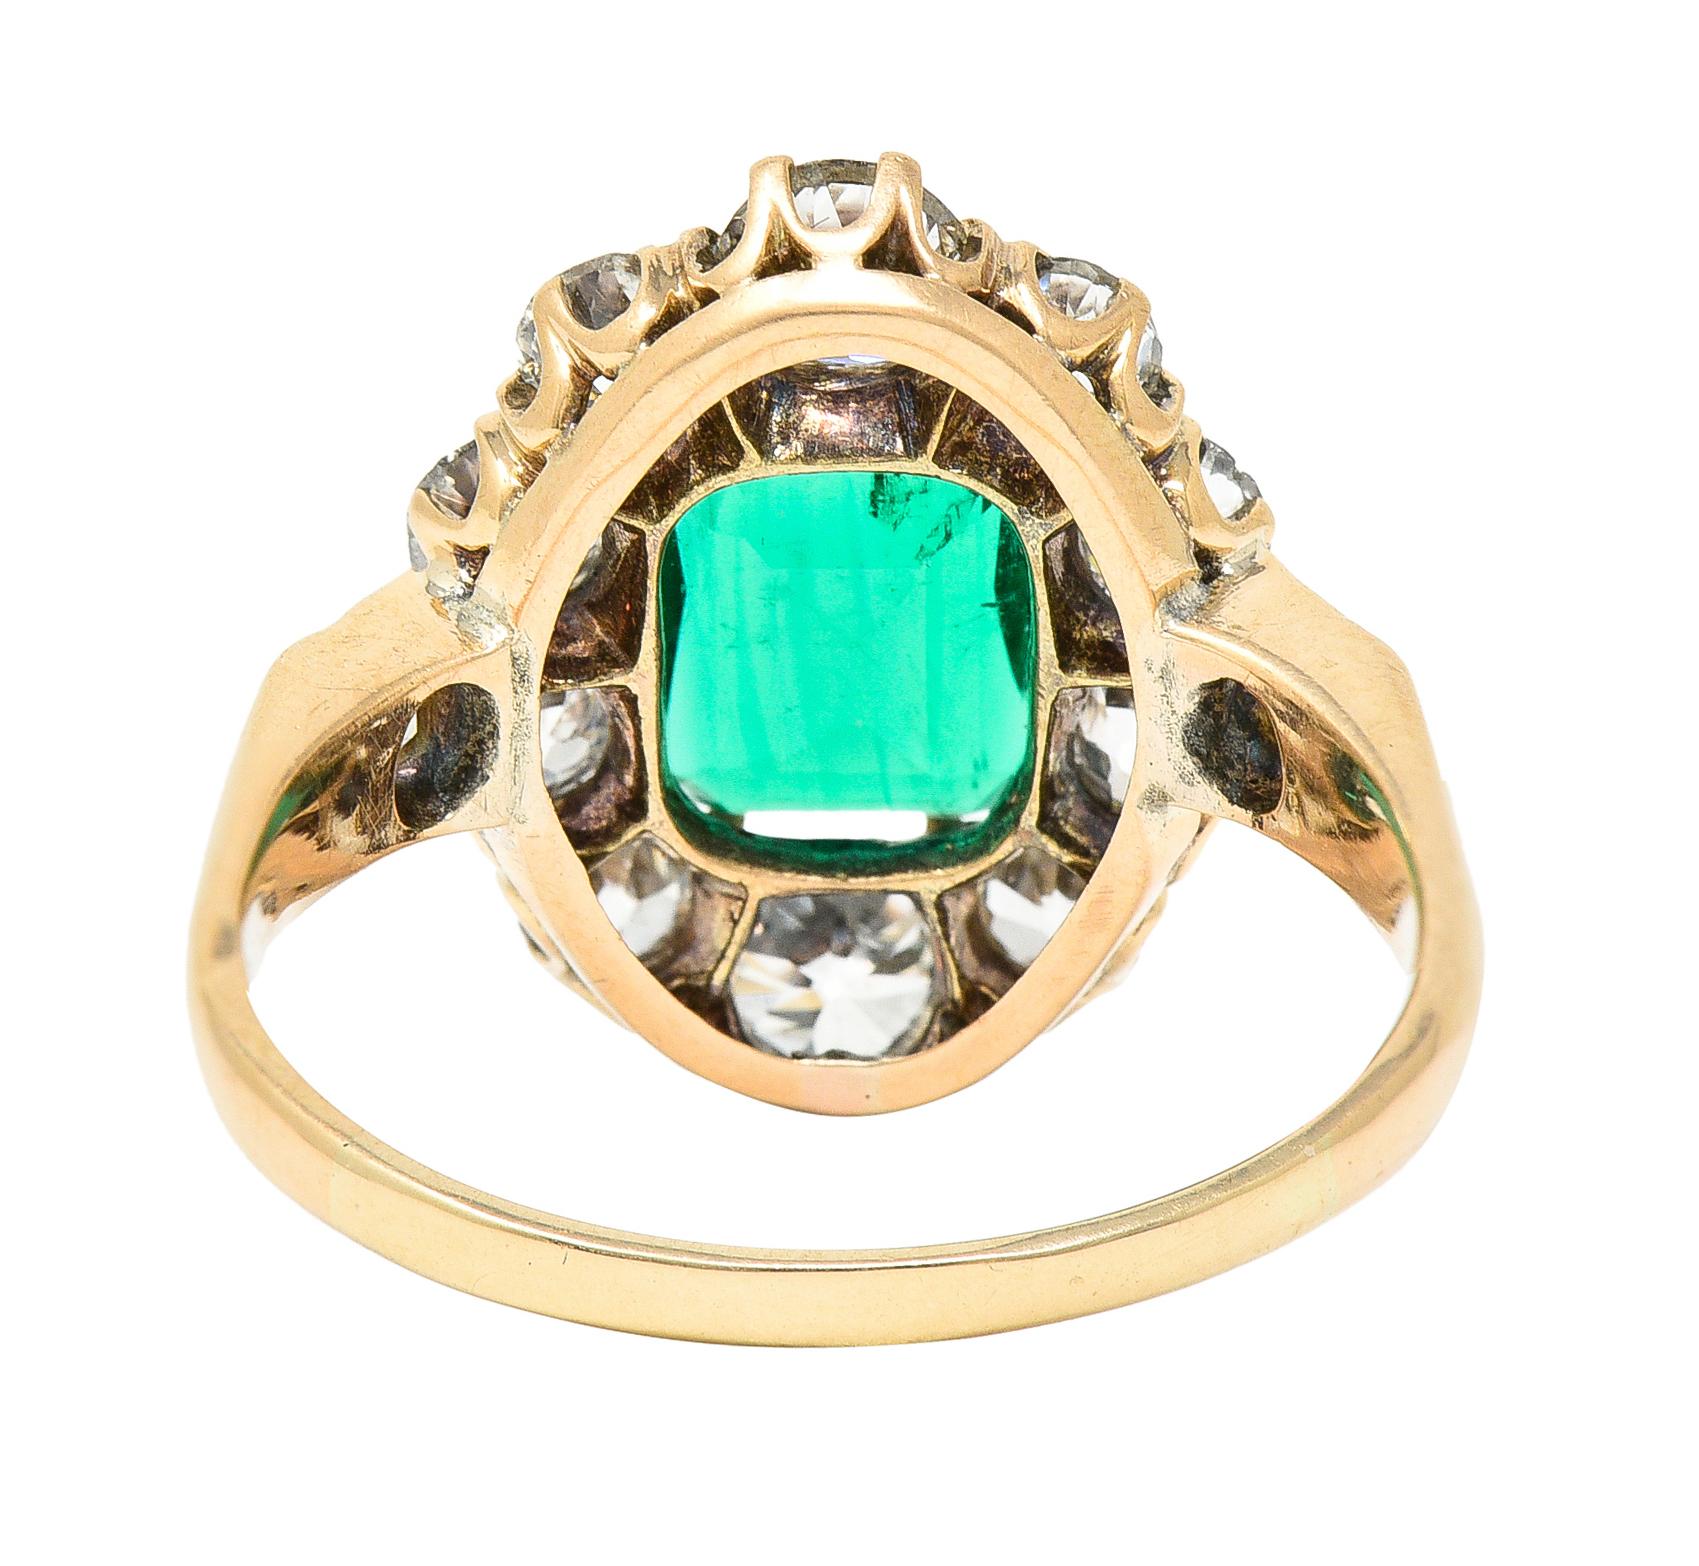 Victorian 2.71 Carat Colombian Cushion Cut Emerald Diamond 14 Karat Gold Ring In Excellent Condition For Sale In Philadelphia, PA